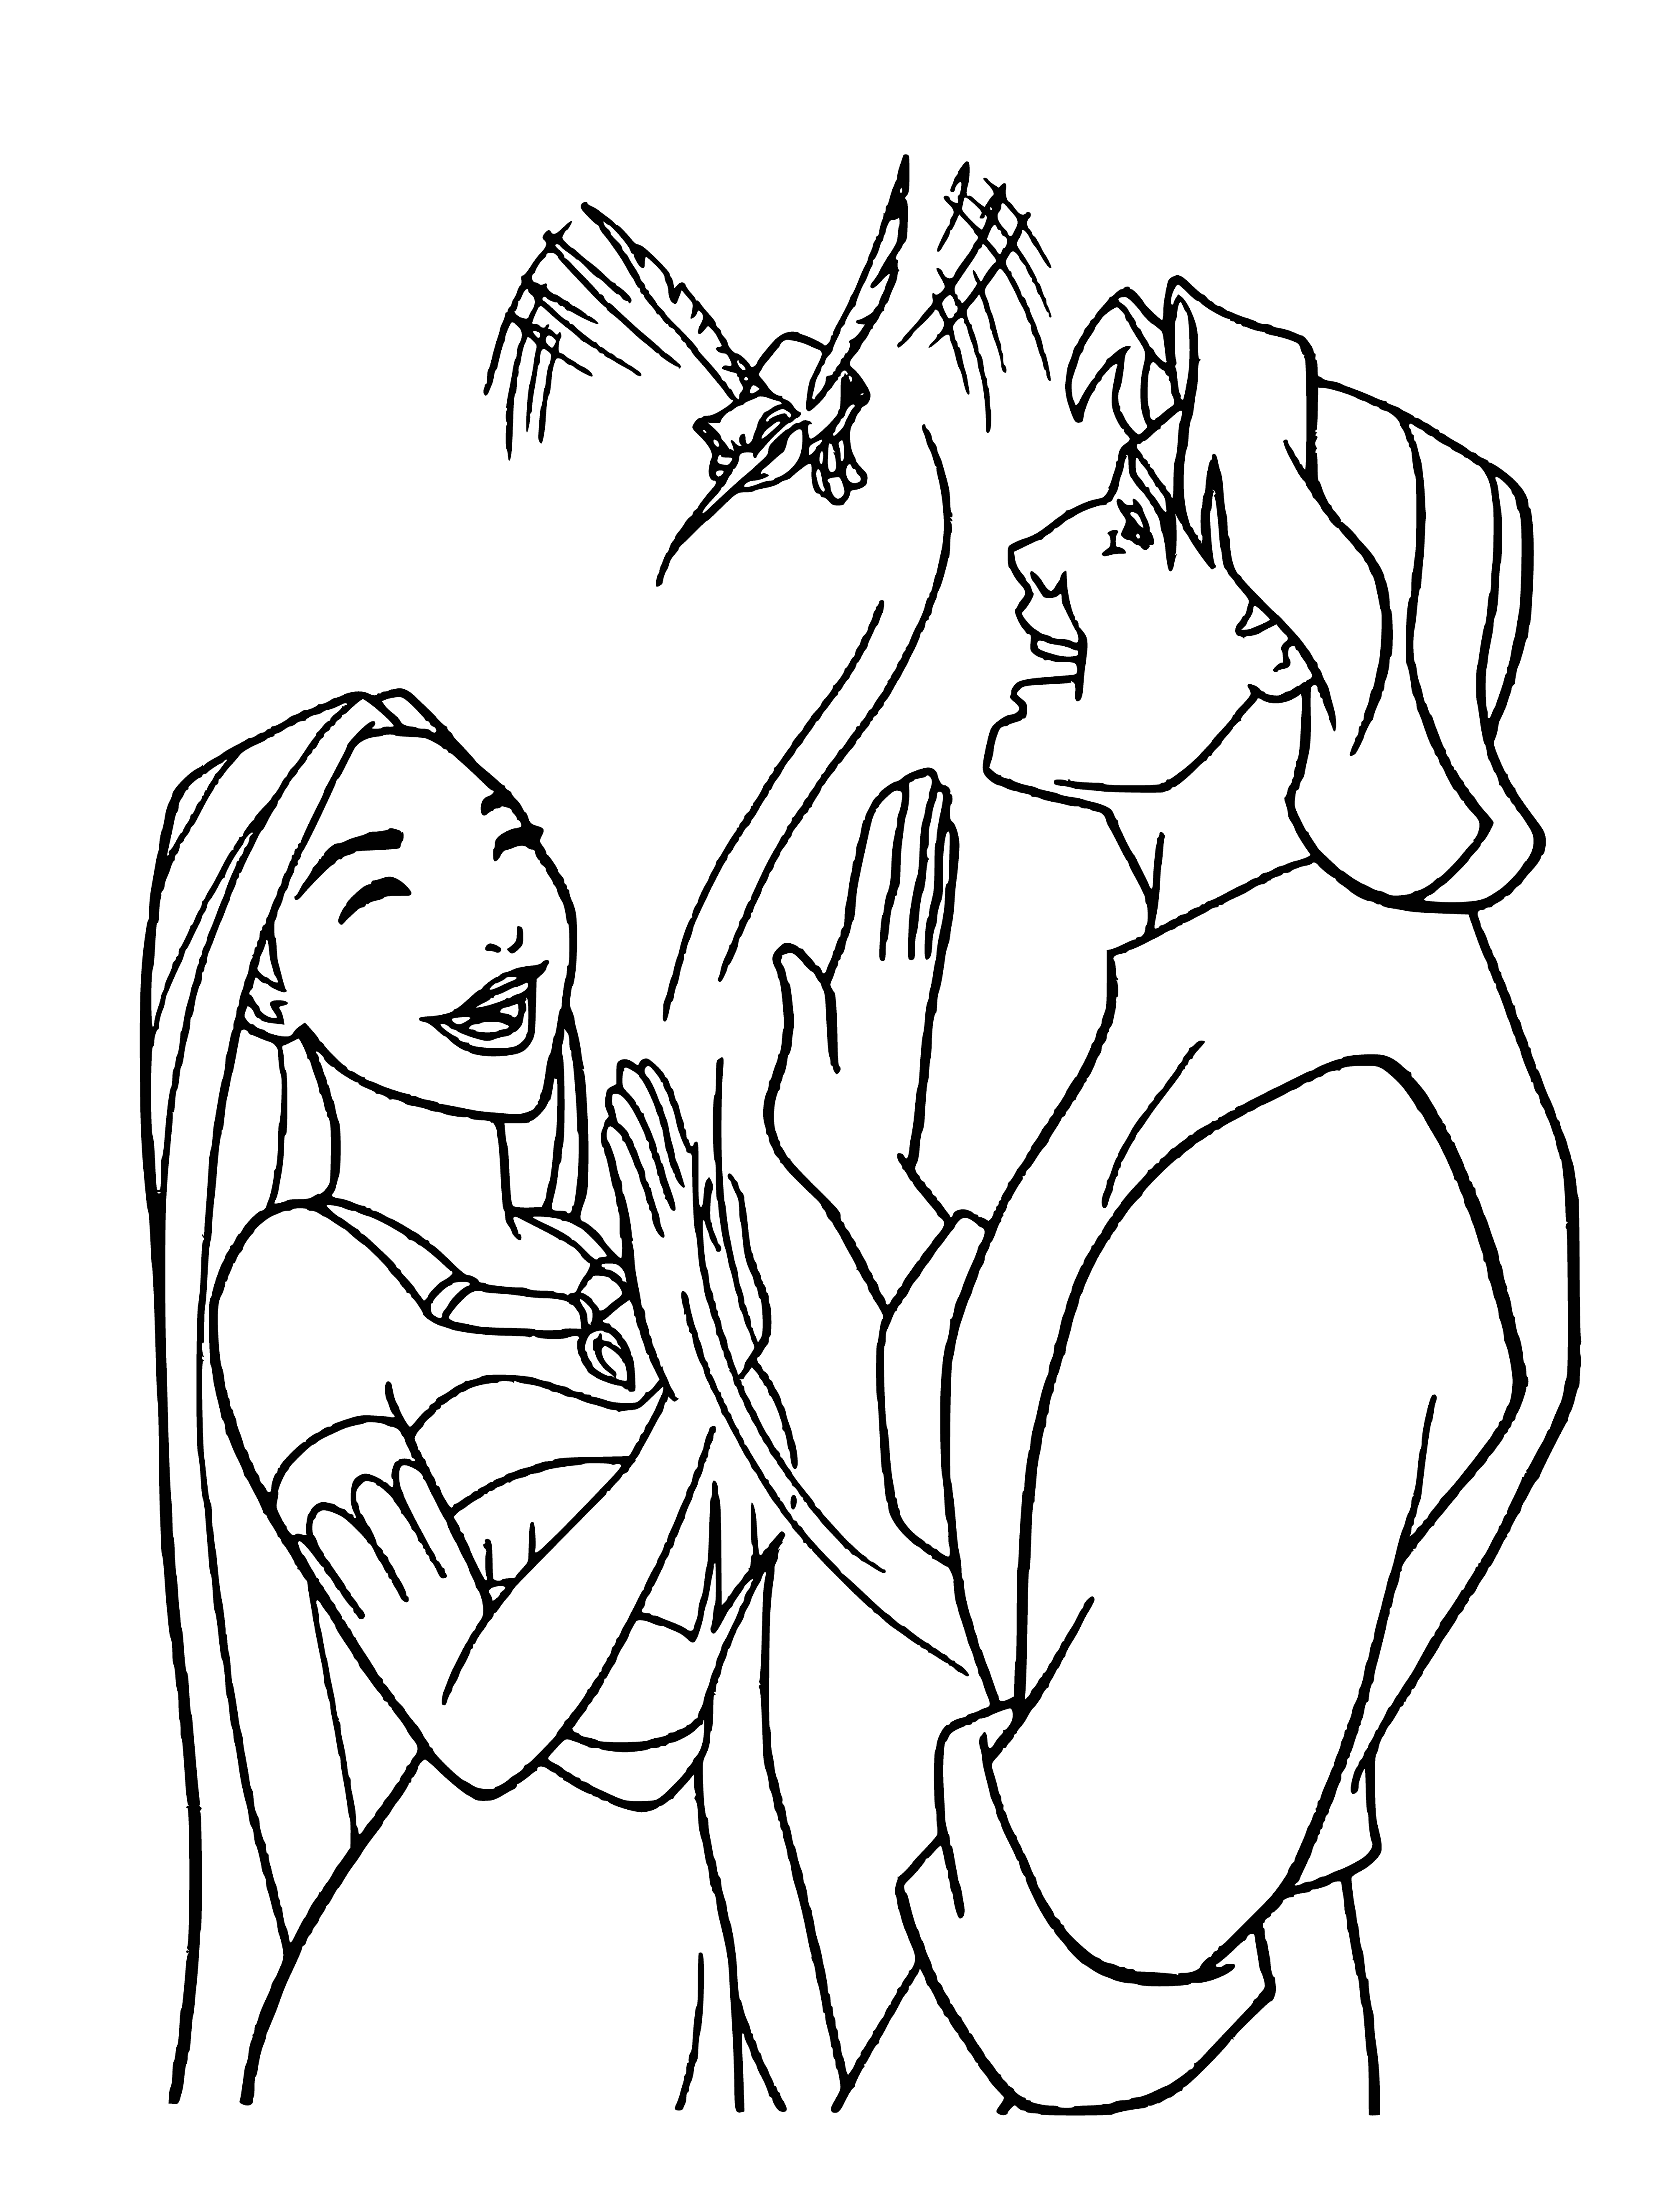 coloring page: A man and two women, dressed in white, red, and blue, smile at the camera on a sunny day beneath trees.